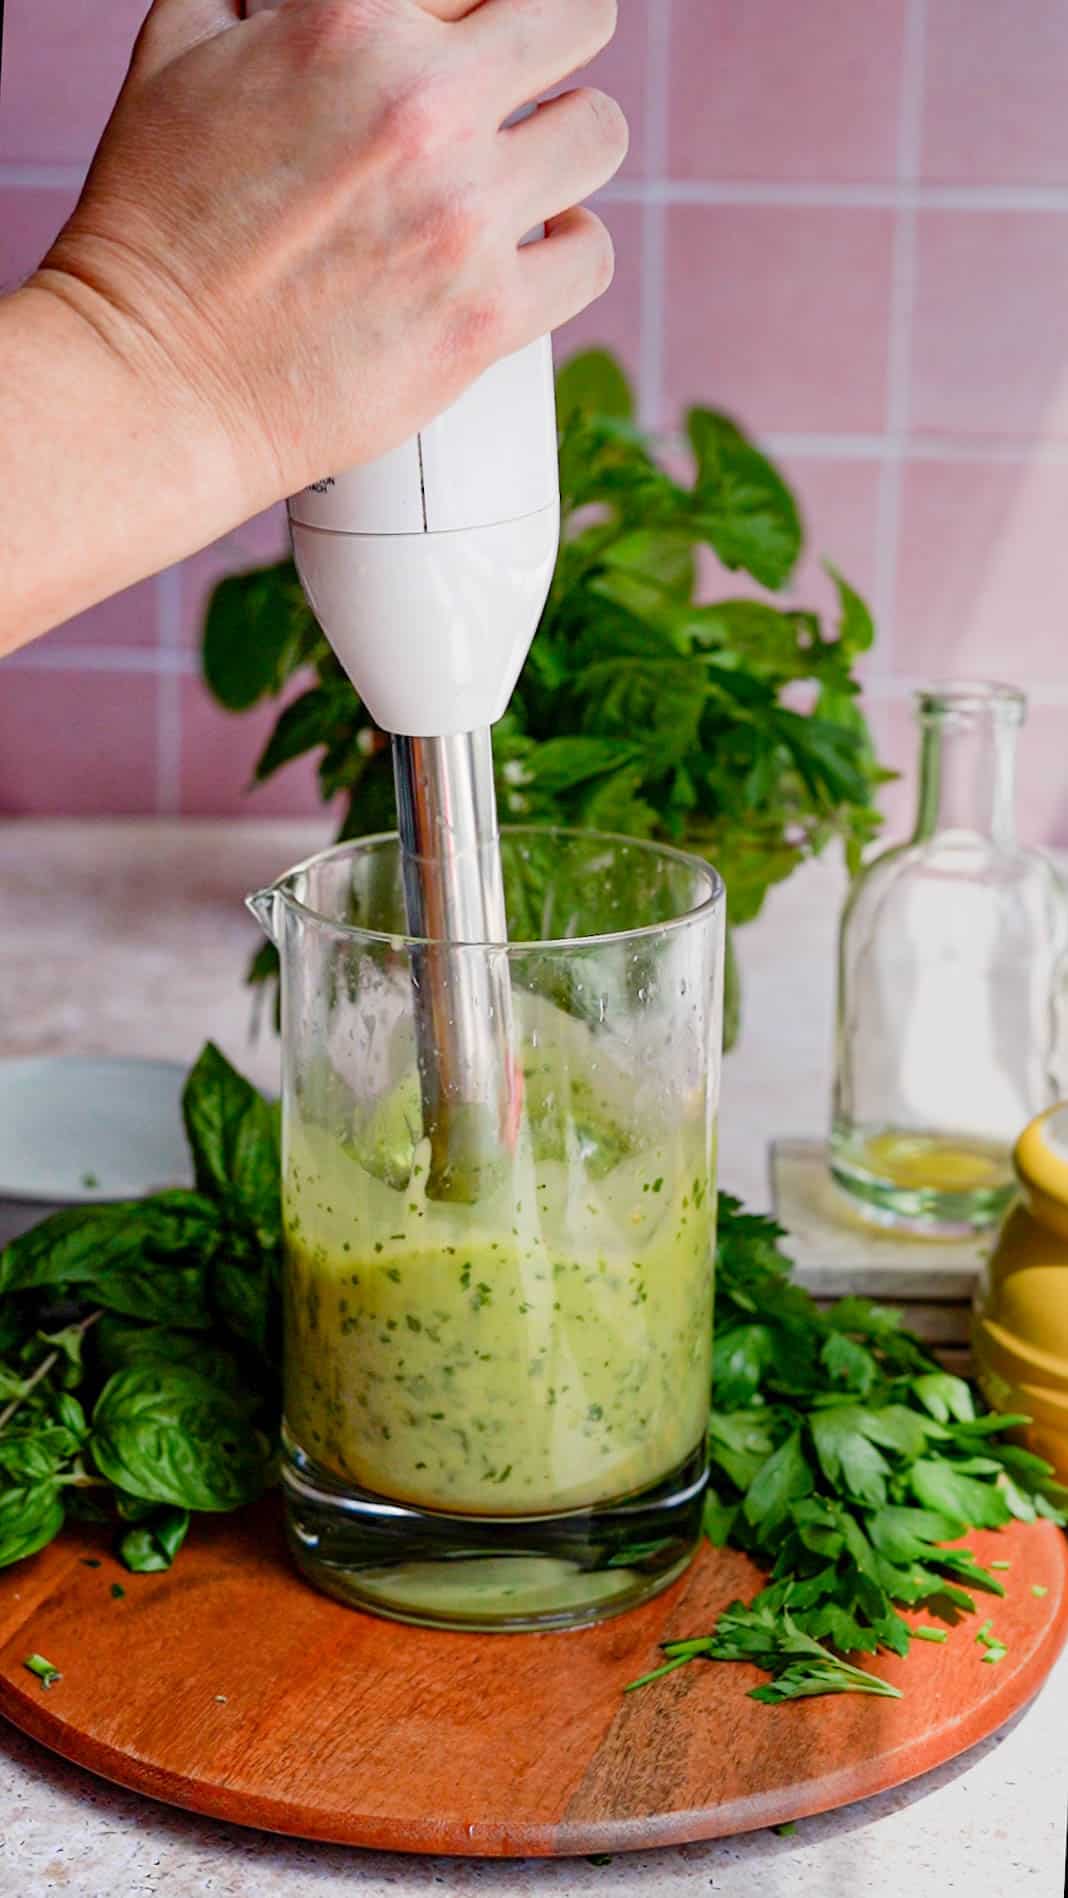 an assortment of fresh herbs (basil, chives, parsley and oregano) have been added to the base of a vinaigrette recipe, and are being mixed in using an immersion blender.